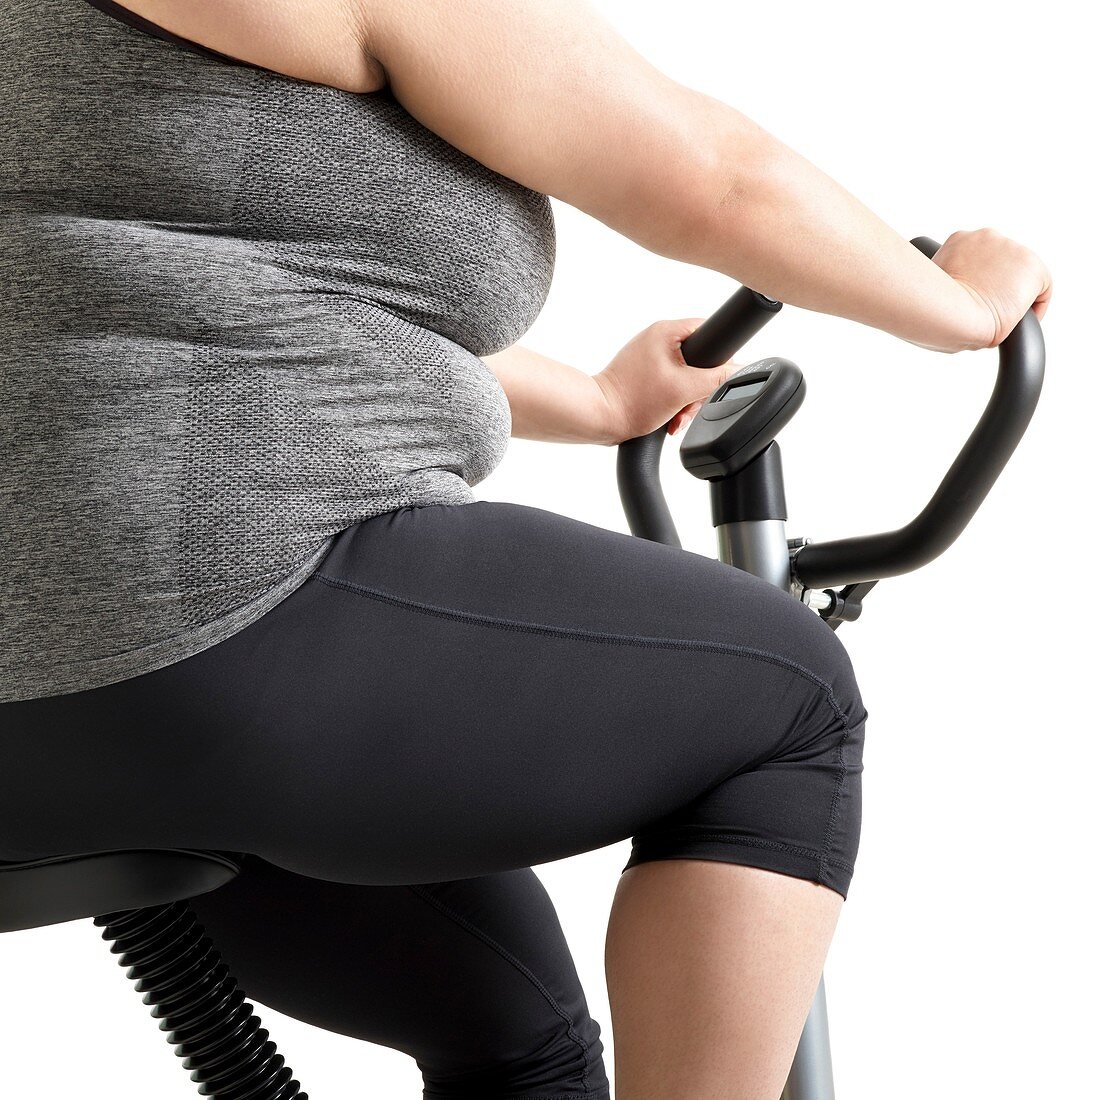 Overweight woman on exercise bike